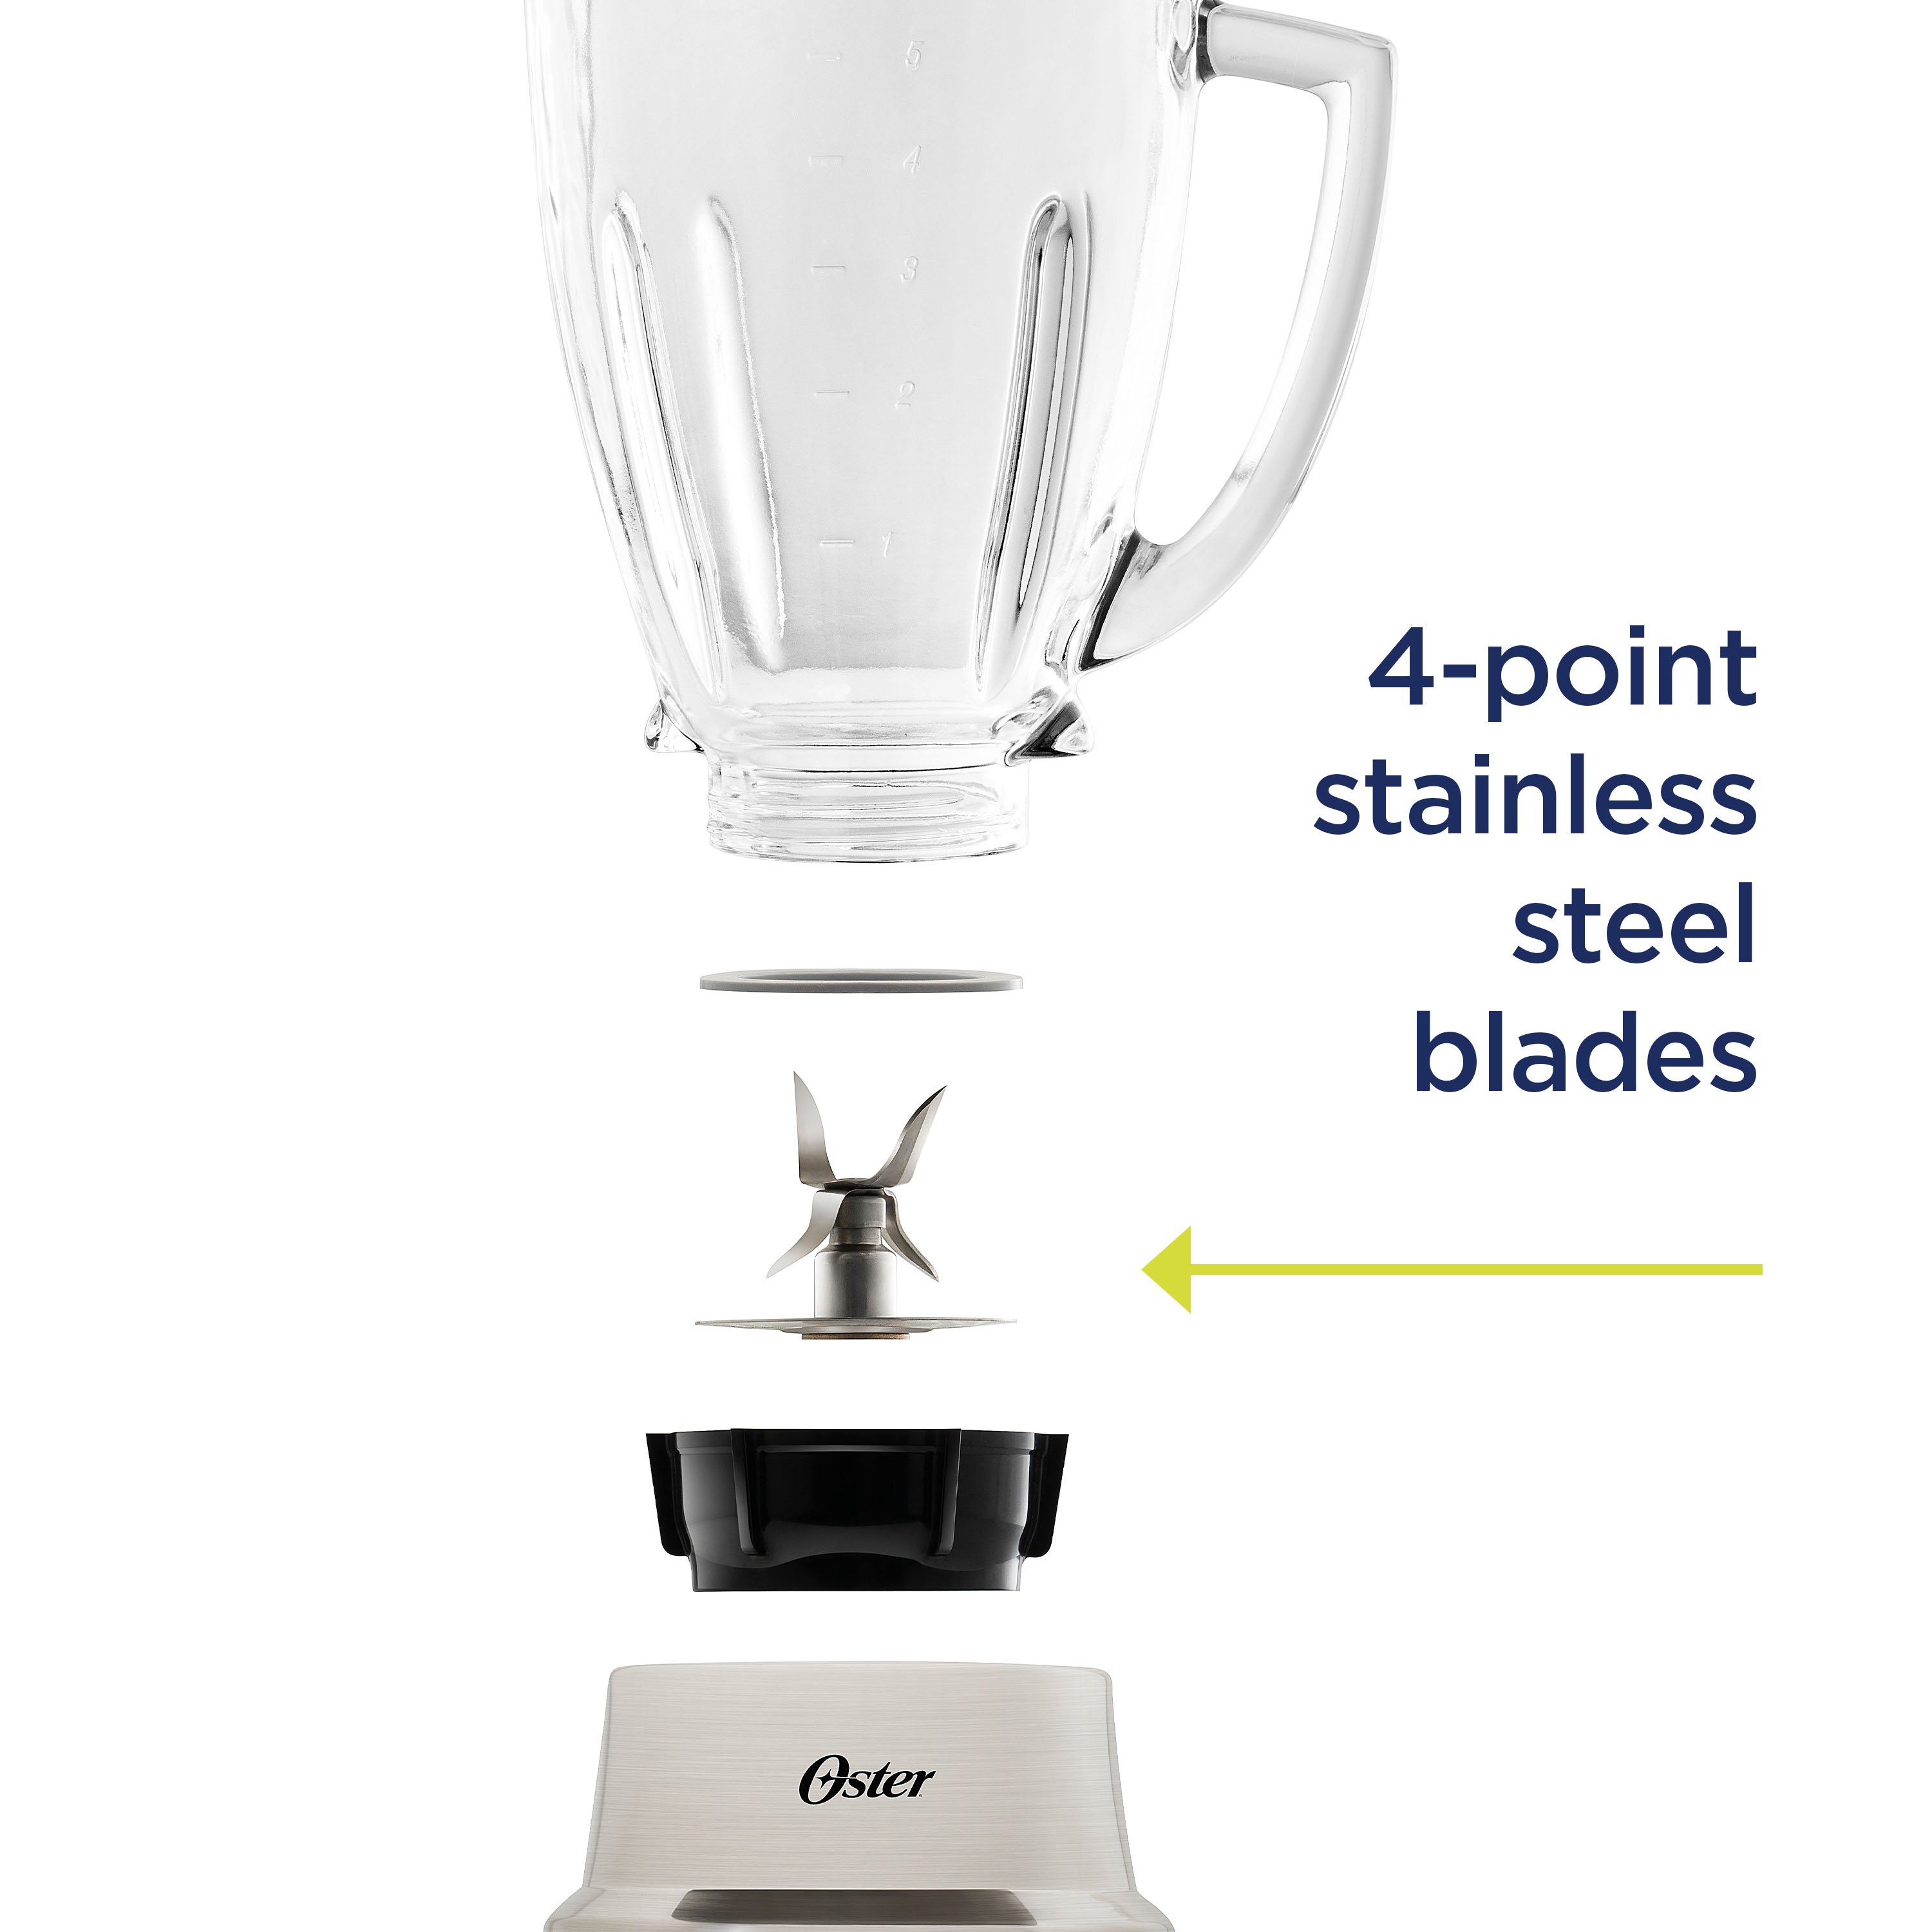 Oster One Touch Blender with Auto Programs and 6 Cup Boroclass Glass Jar